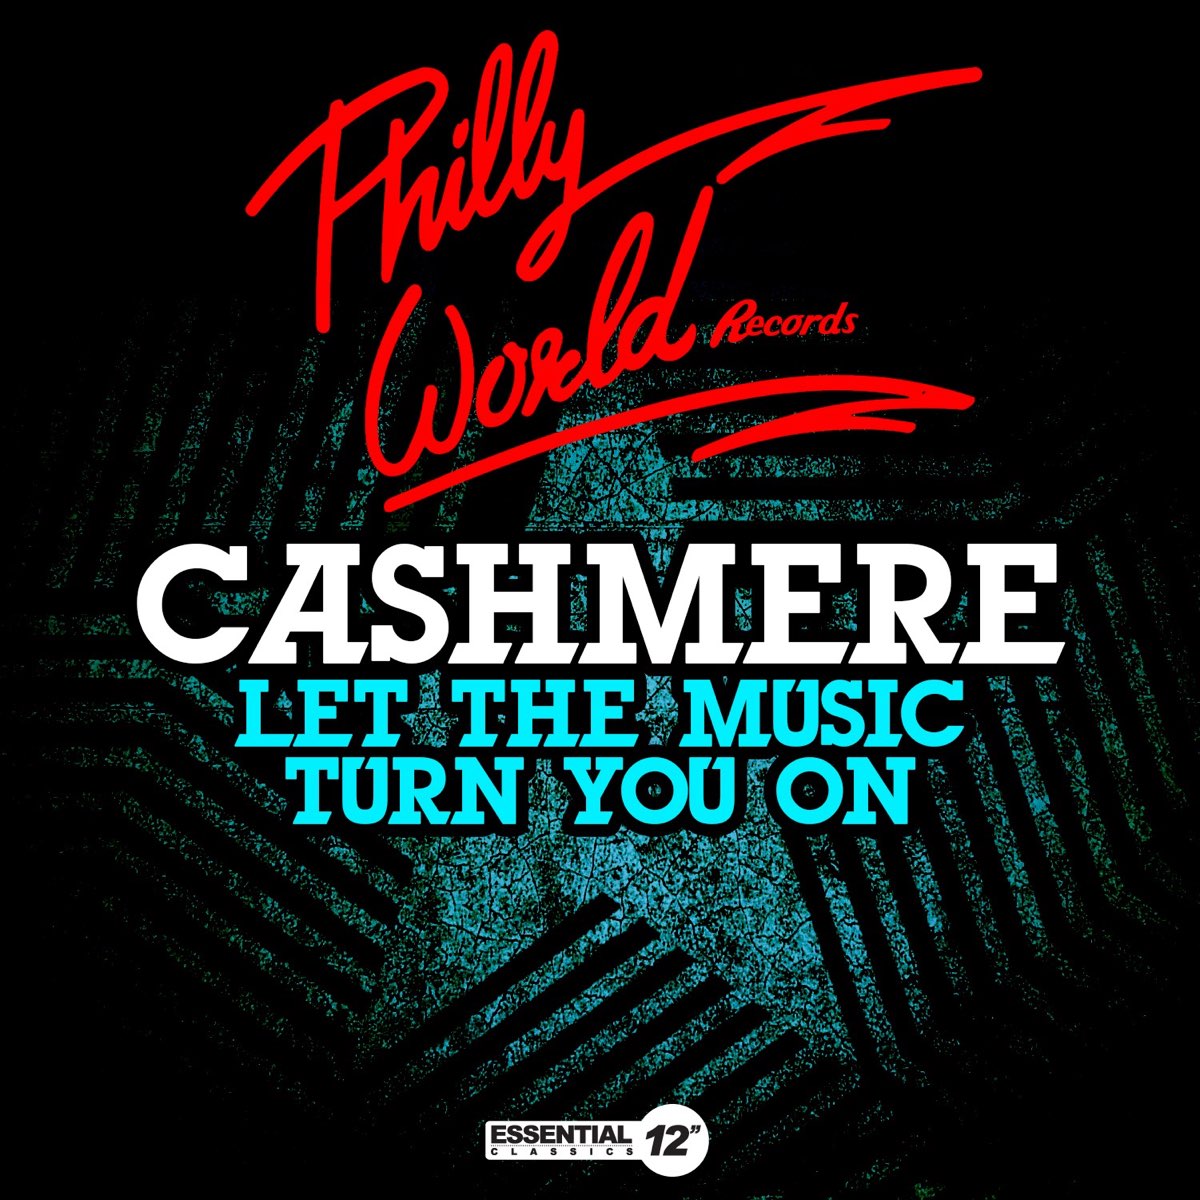 Can you turn the music. Lets Cashmere. Turn on the Music. Turn the Music loudly.